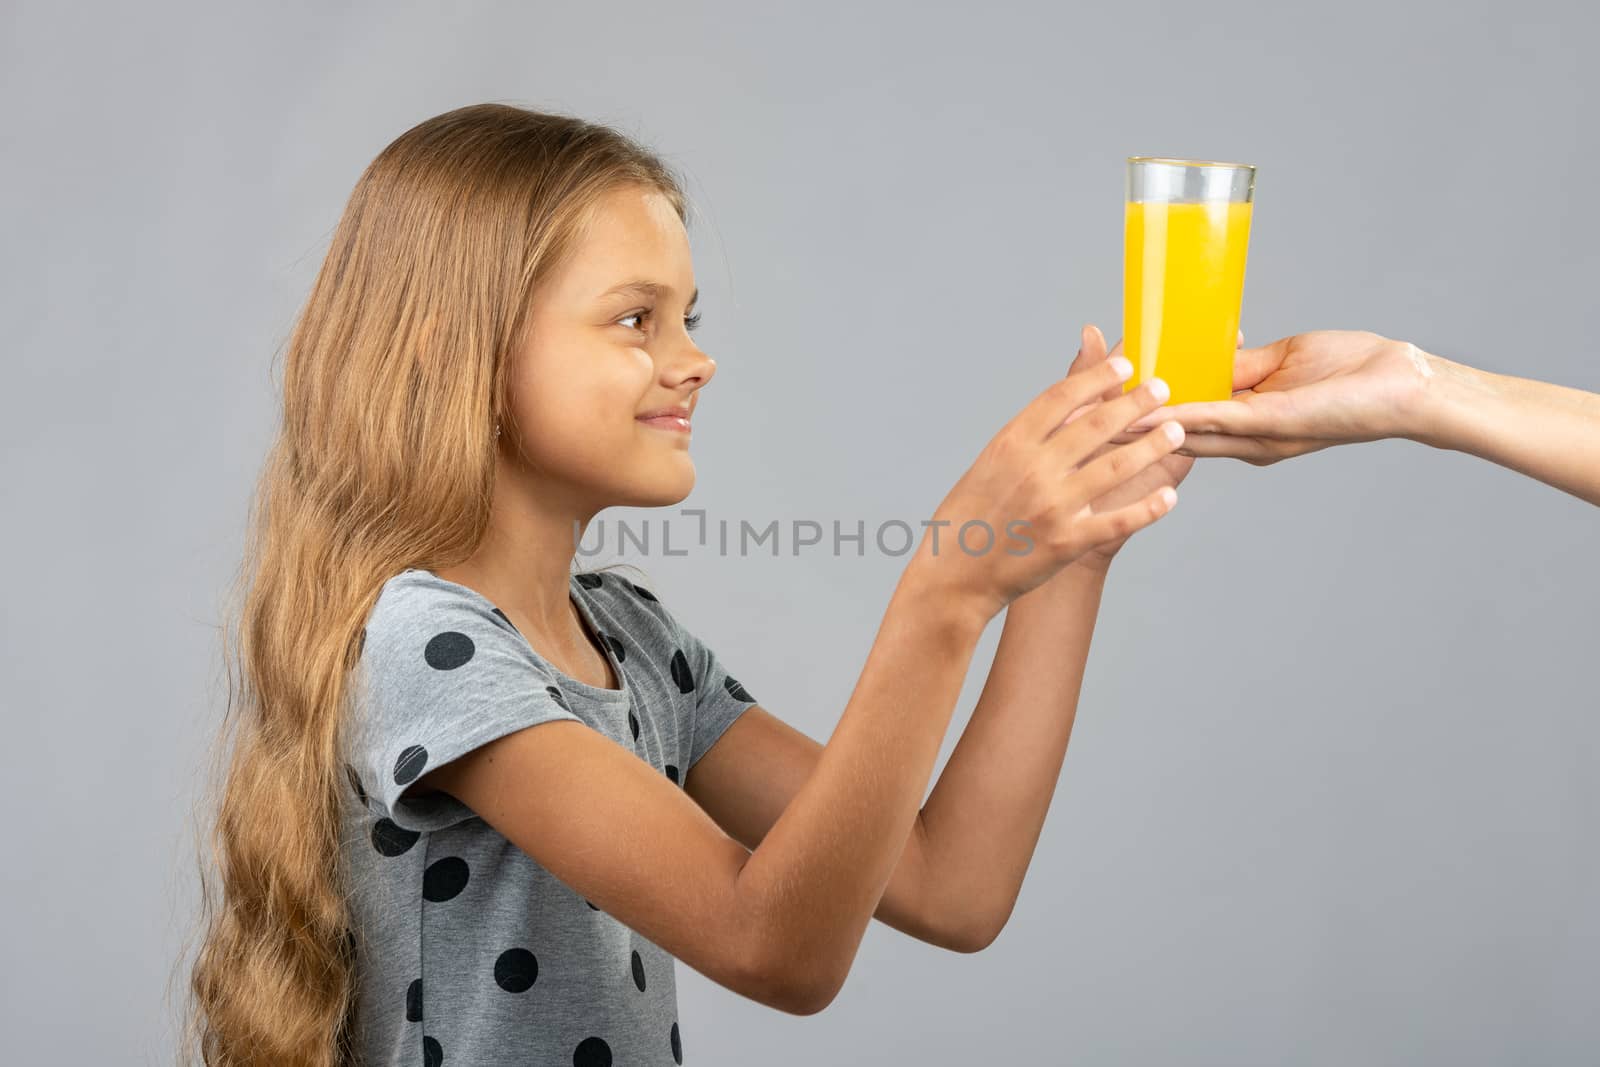 A girl with two hands takes a glass of juice from the hand of another person